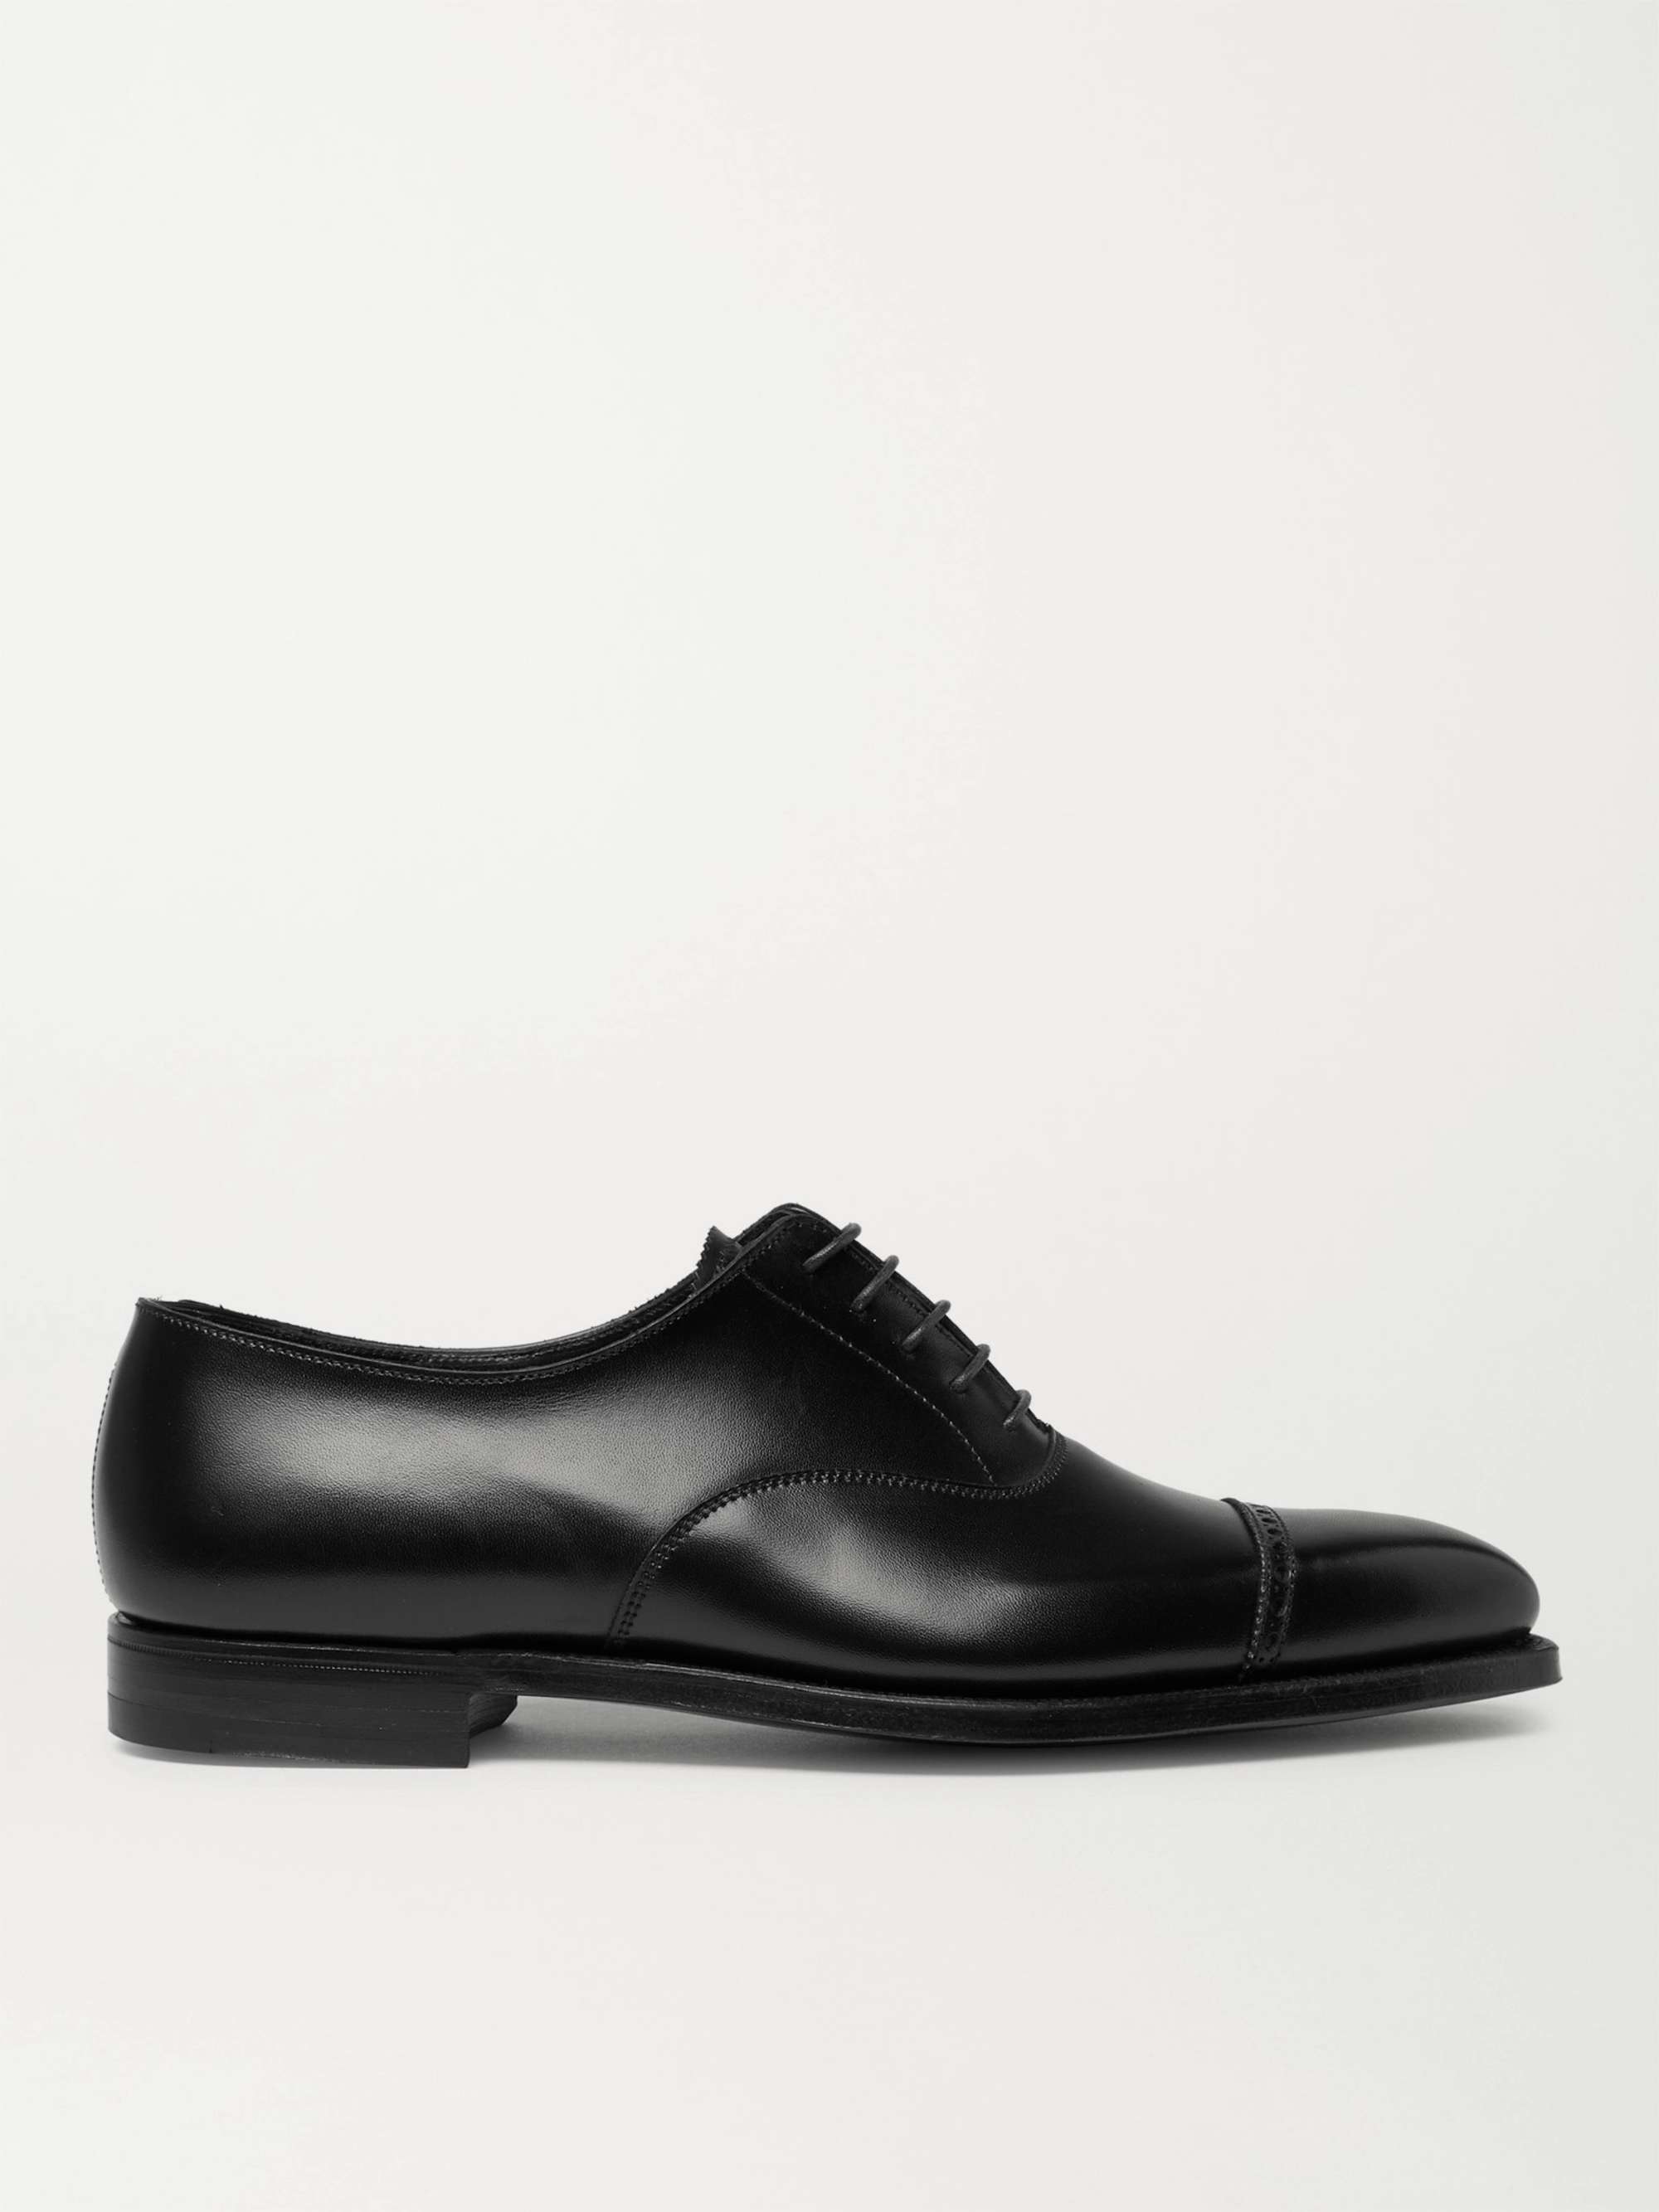 GEORGE CLEVERLEY Charles Cap-Toe Leather Oxford Shoes for Men | MR PORTER